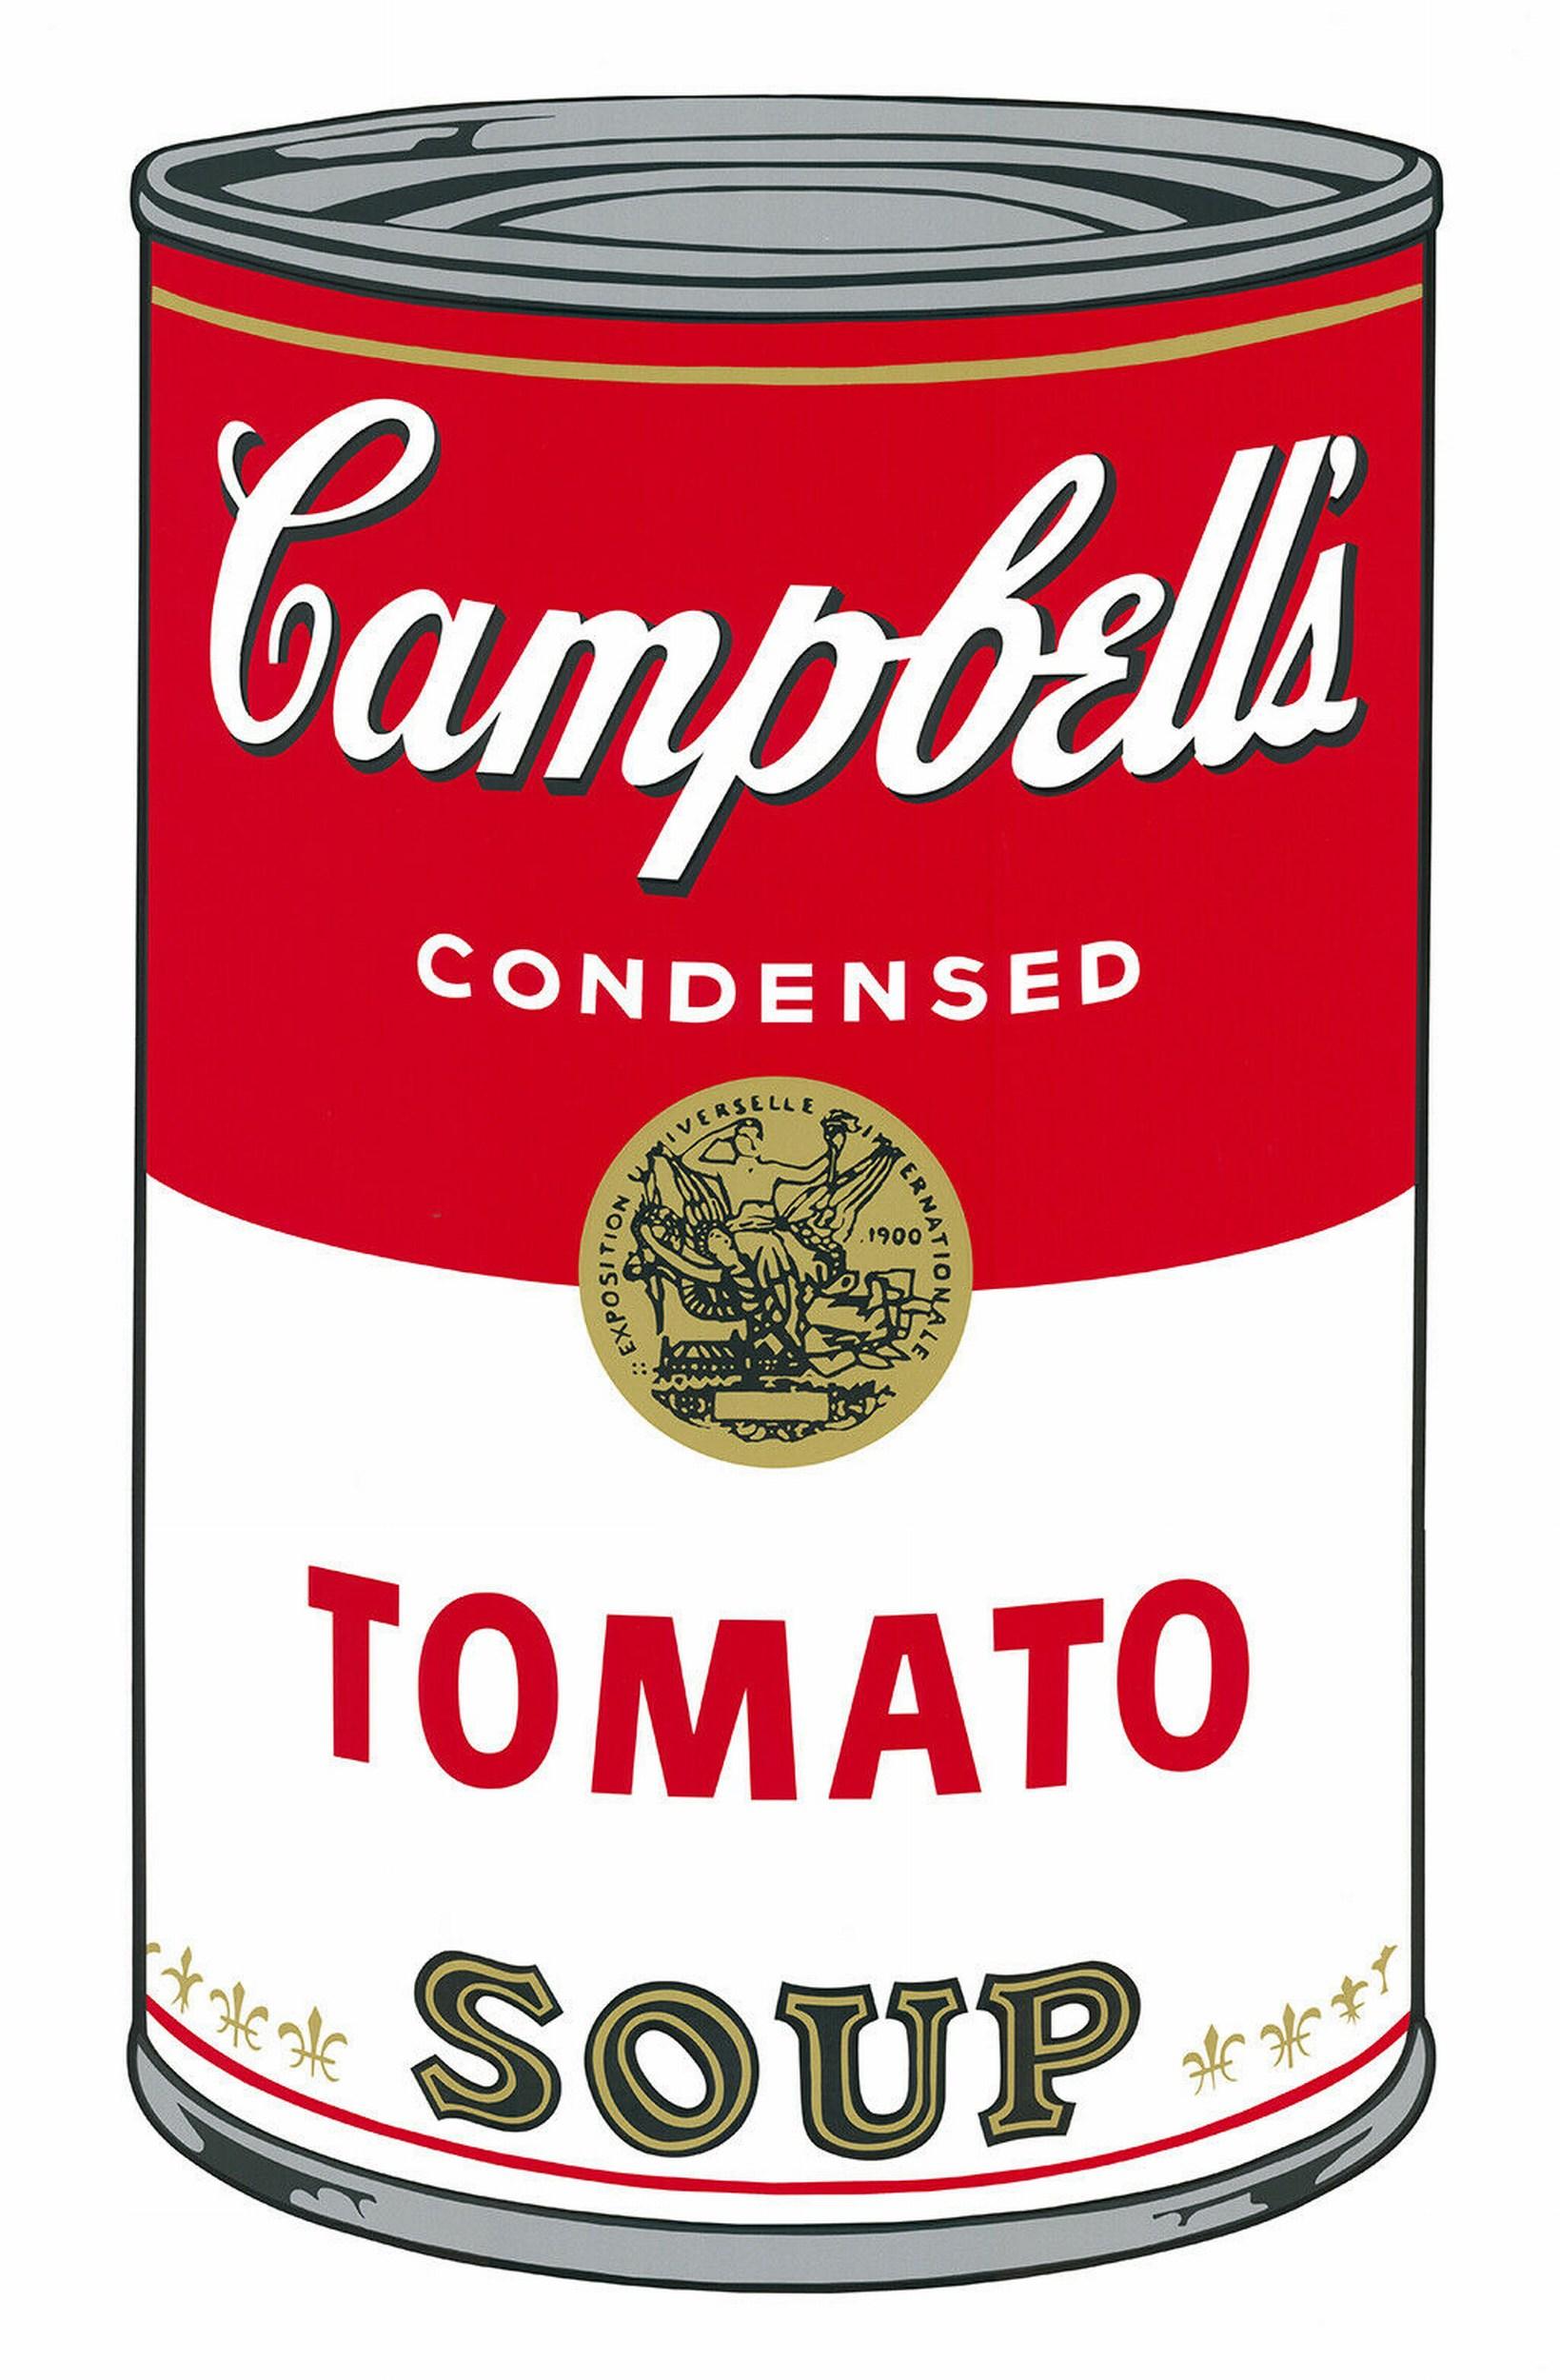 $45 SHIPPING U.S. only (not $499!) - Simply request a quote during Checkout

Sunday B. Morning
Campbell´s Tomato Soup (after Andy Warhol, Pop Art)
Year: 2018
Color silkscreen
Size: 31.6 × 18.5 on 34.7 × 22.8 inches 
catalogue raisonné: vgl.: